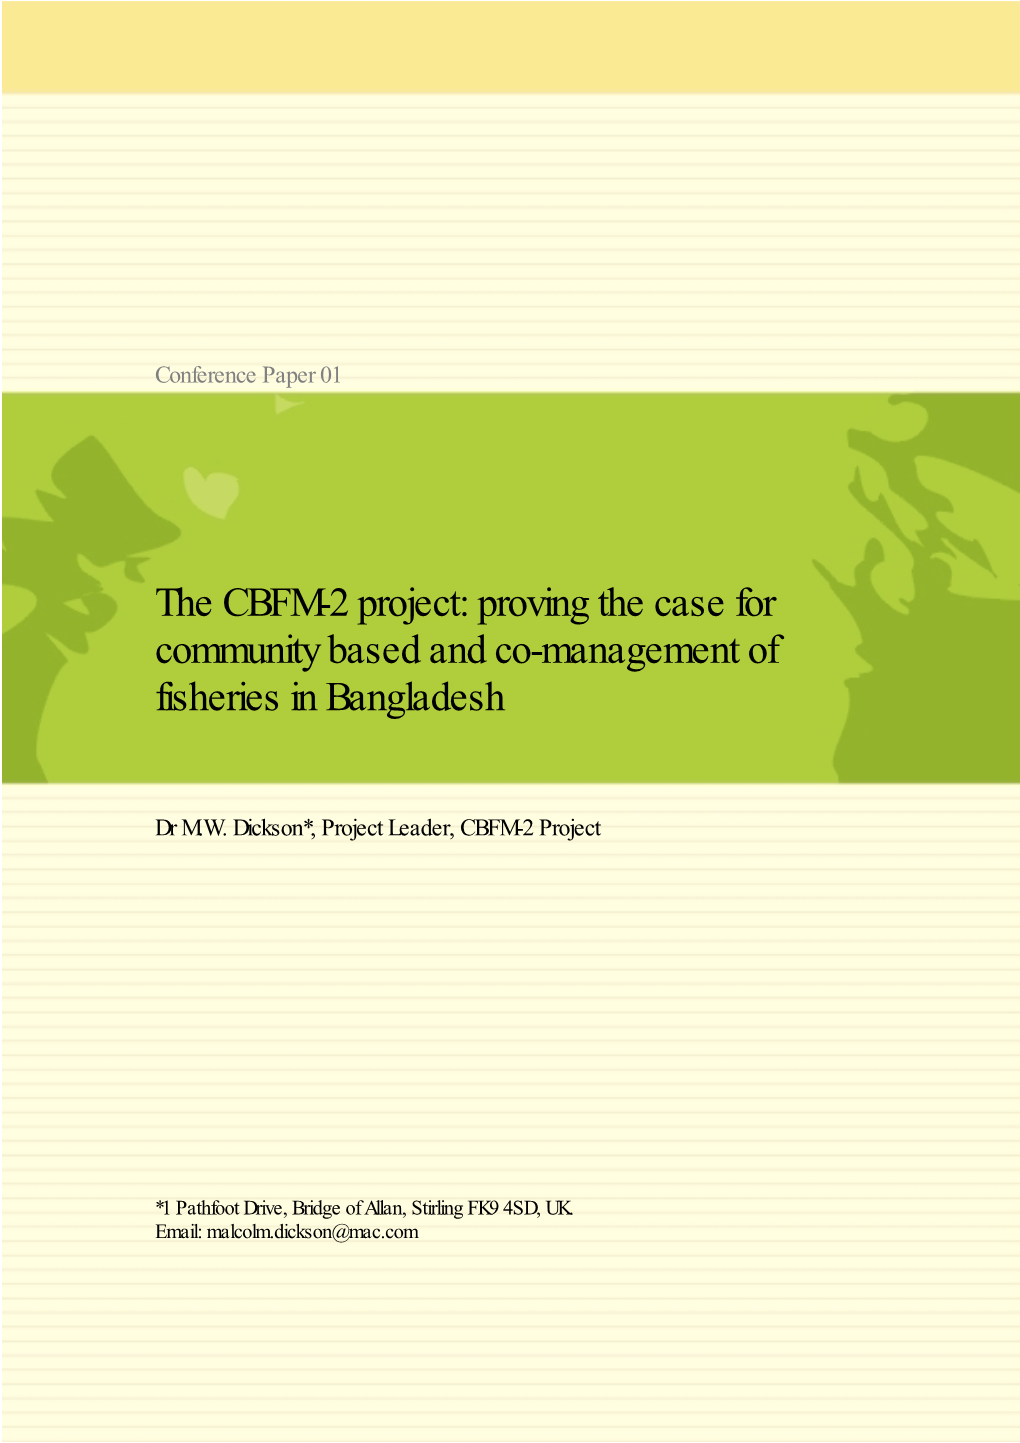 The CBFM-2 Project: Proving the Case for Community Based and Co-Management of Fisheries in Bangladesh